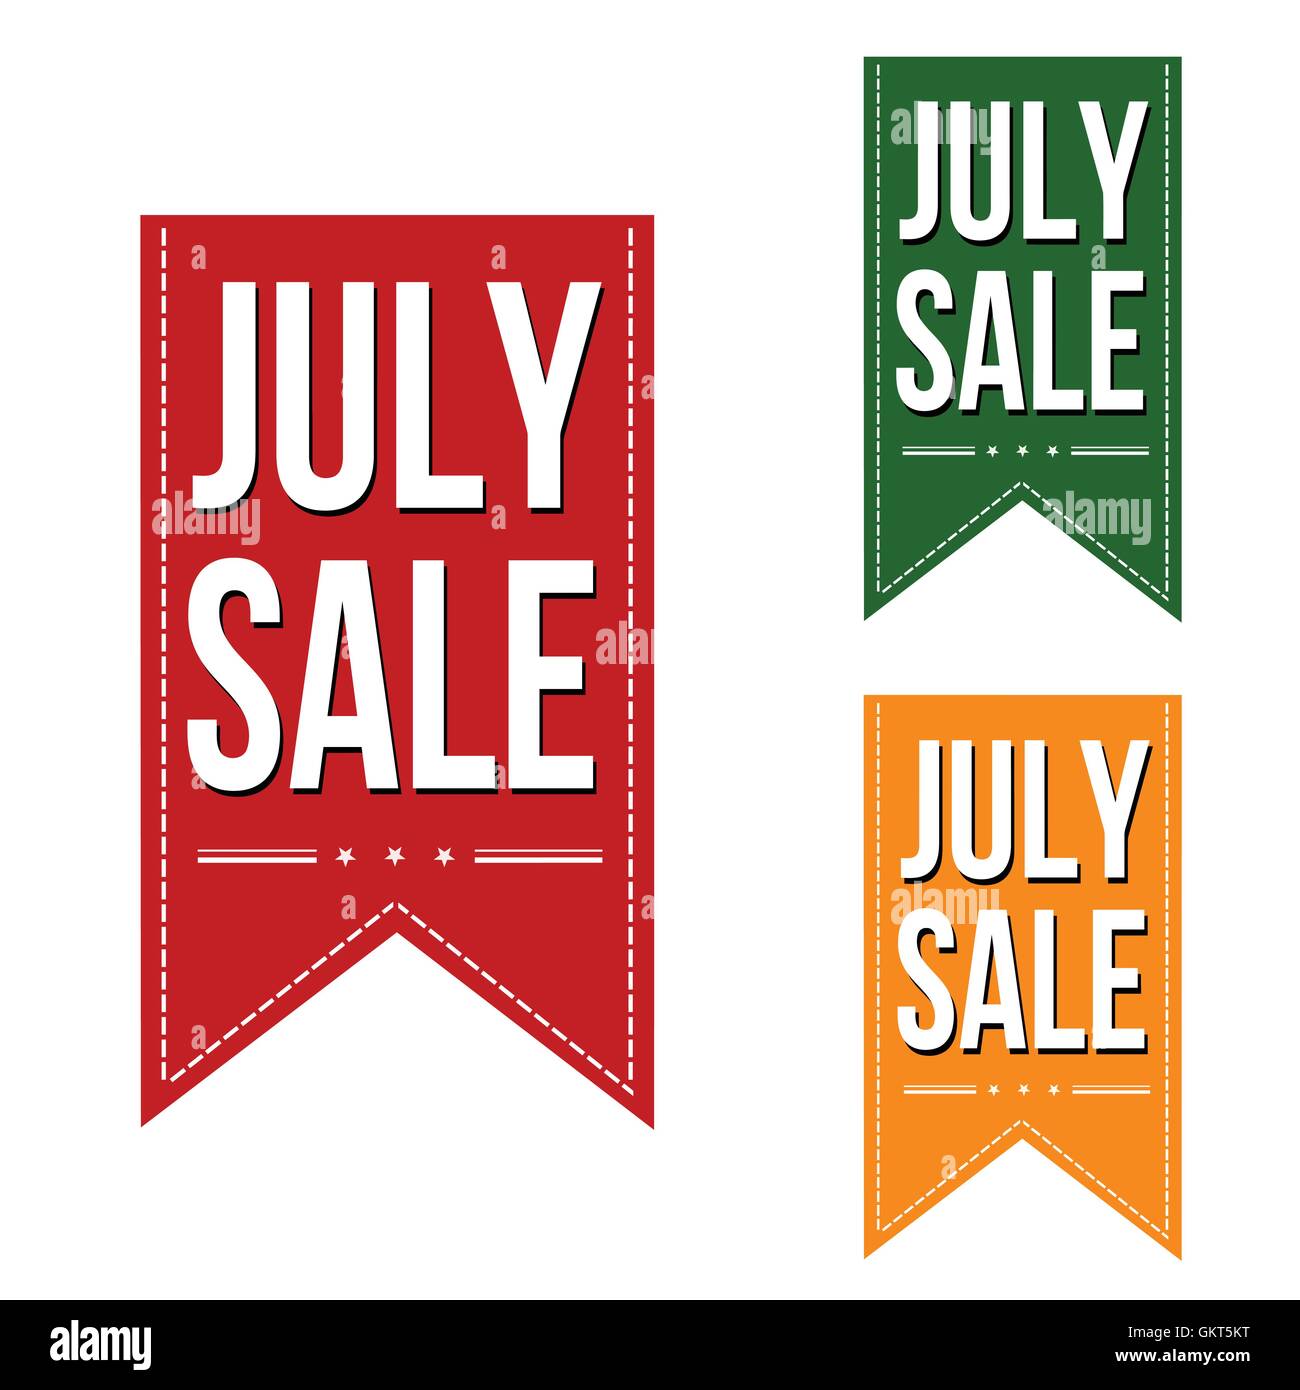 July sale banners design Stock Vector